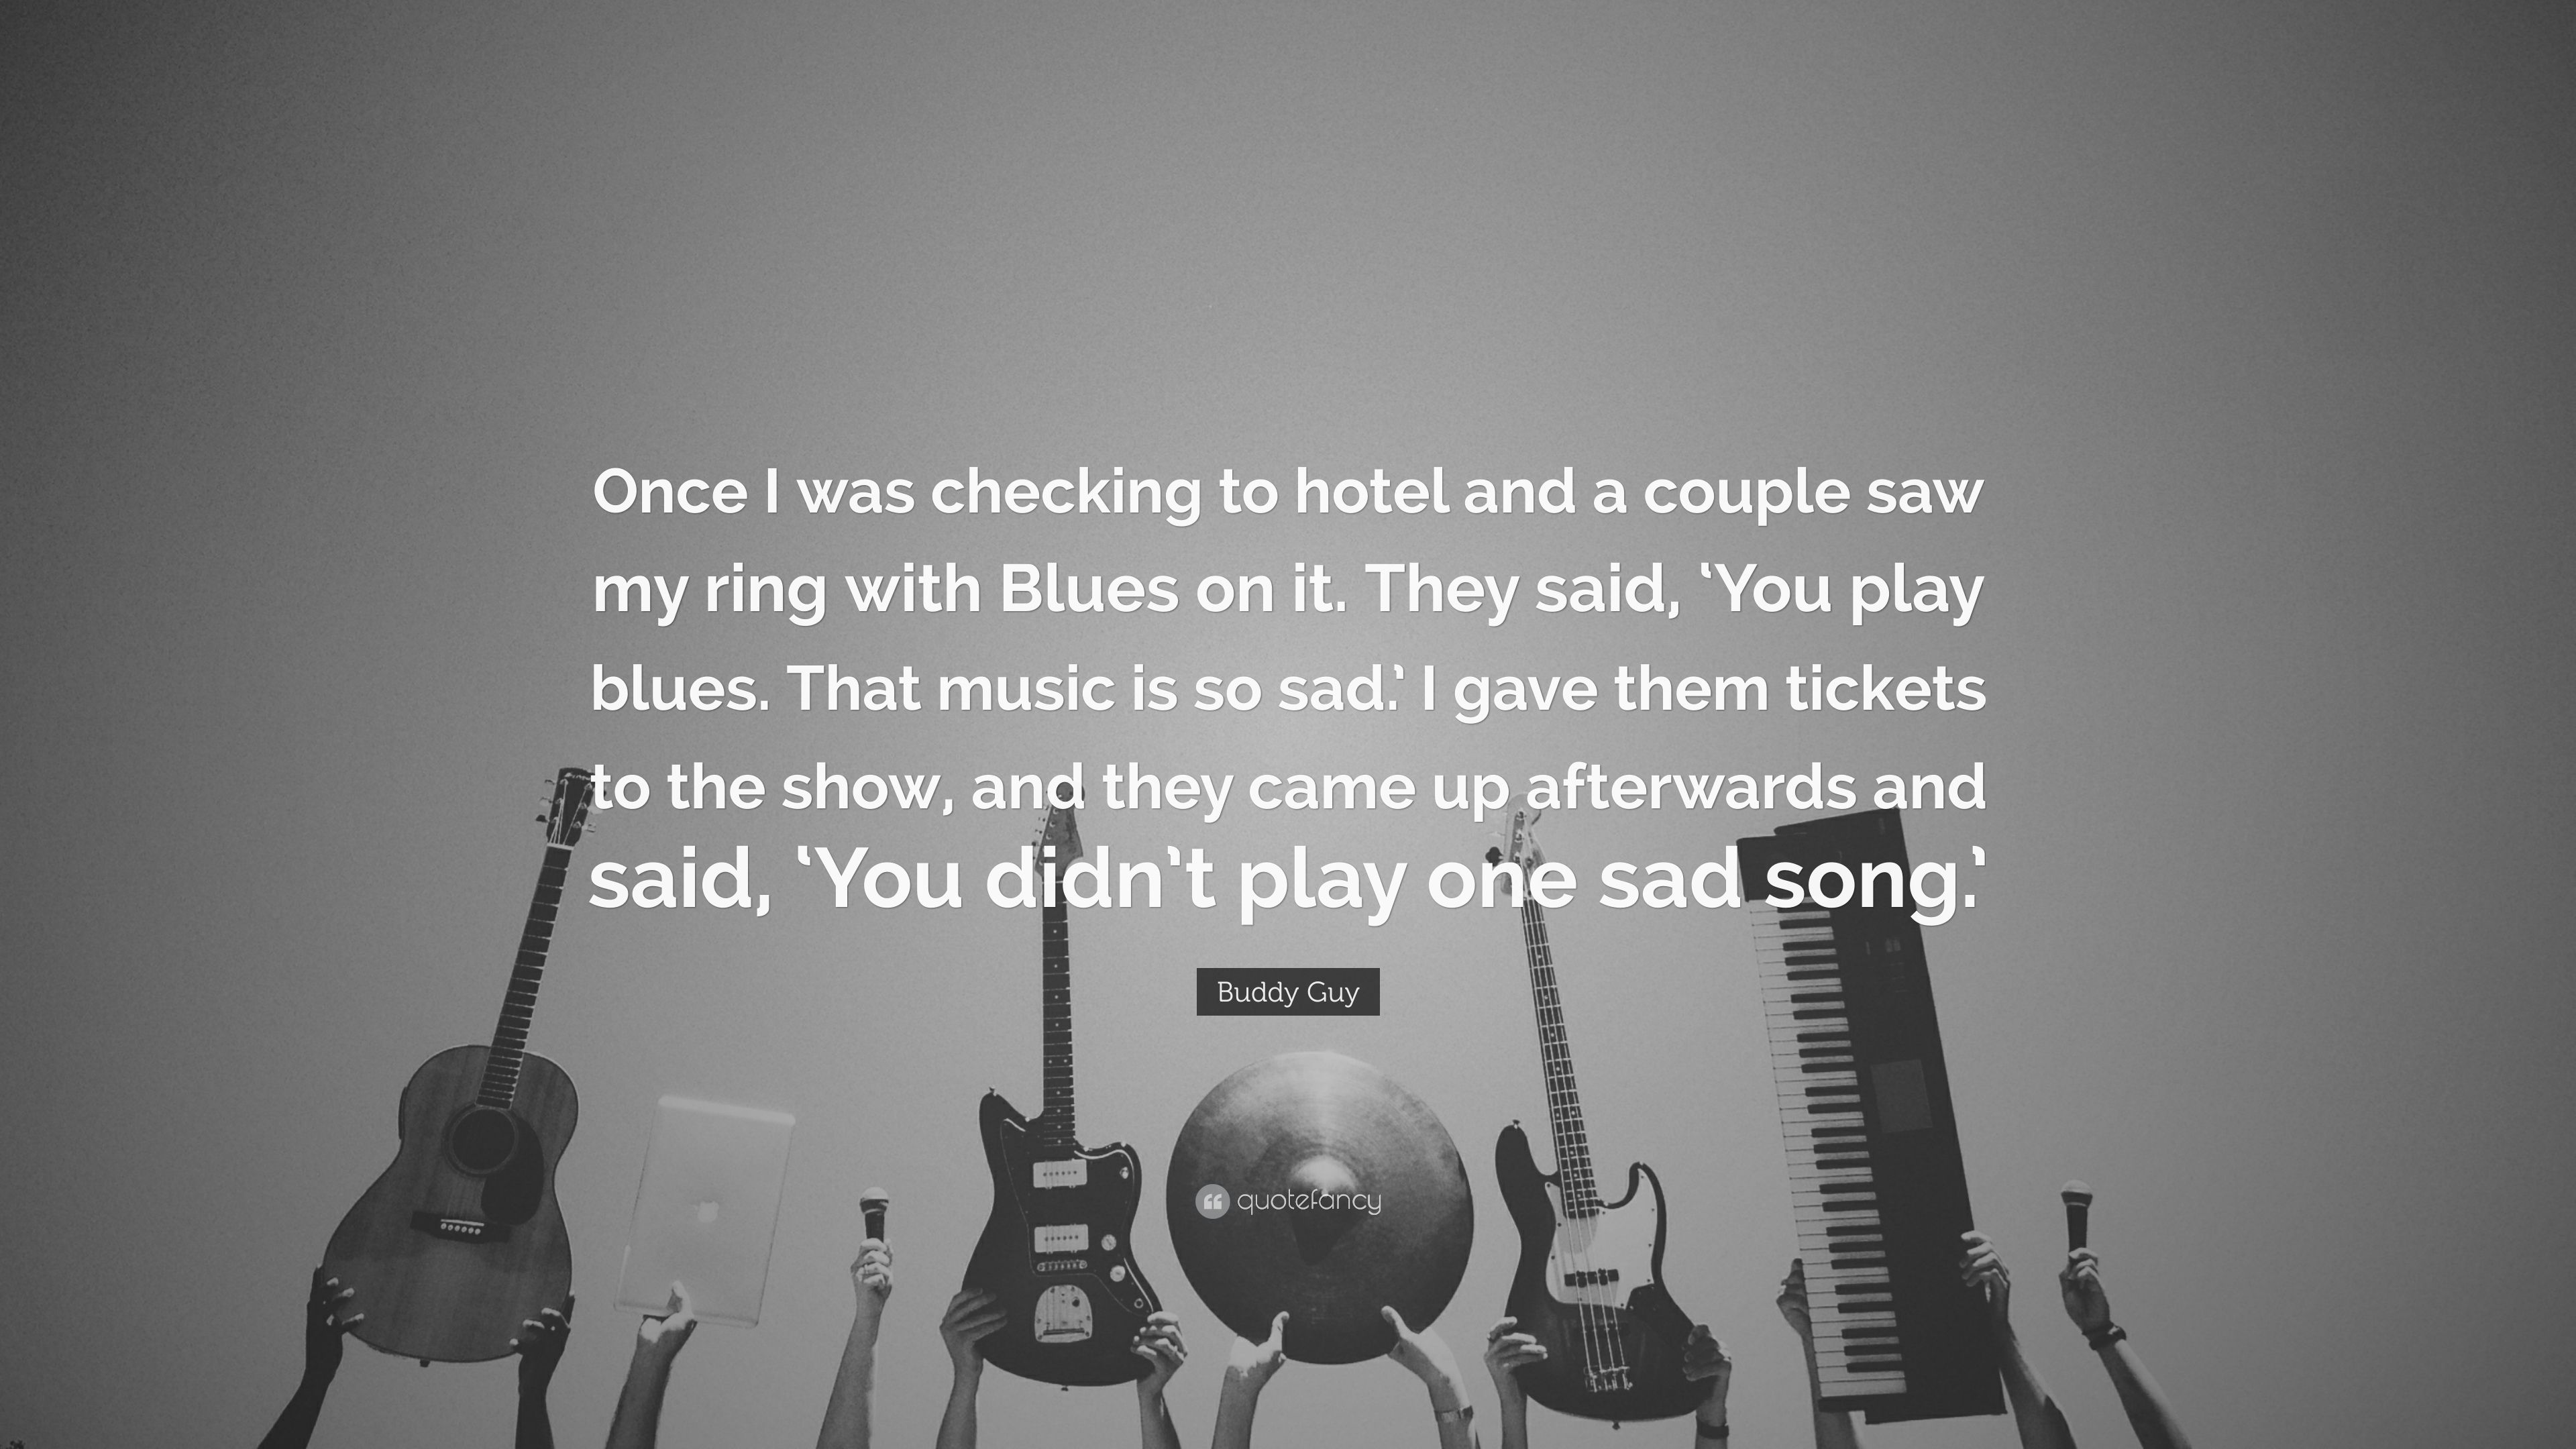 Buddy Guy Quote: “Once I was checking to hotel and a couple saw my